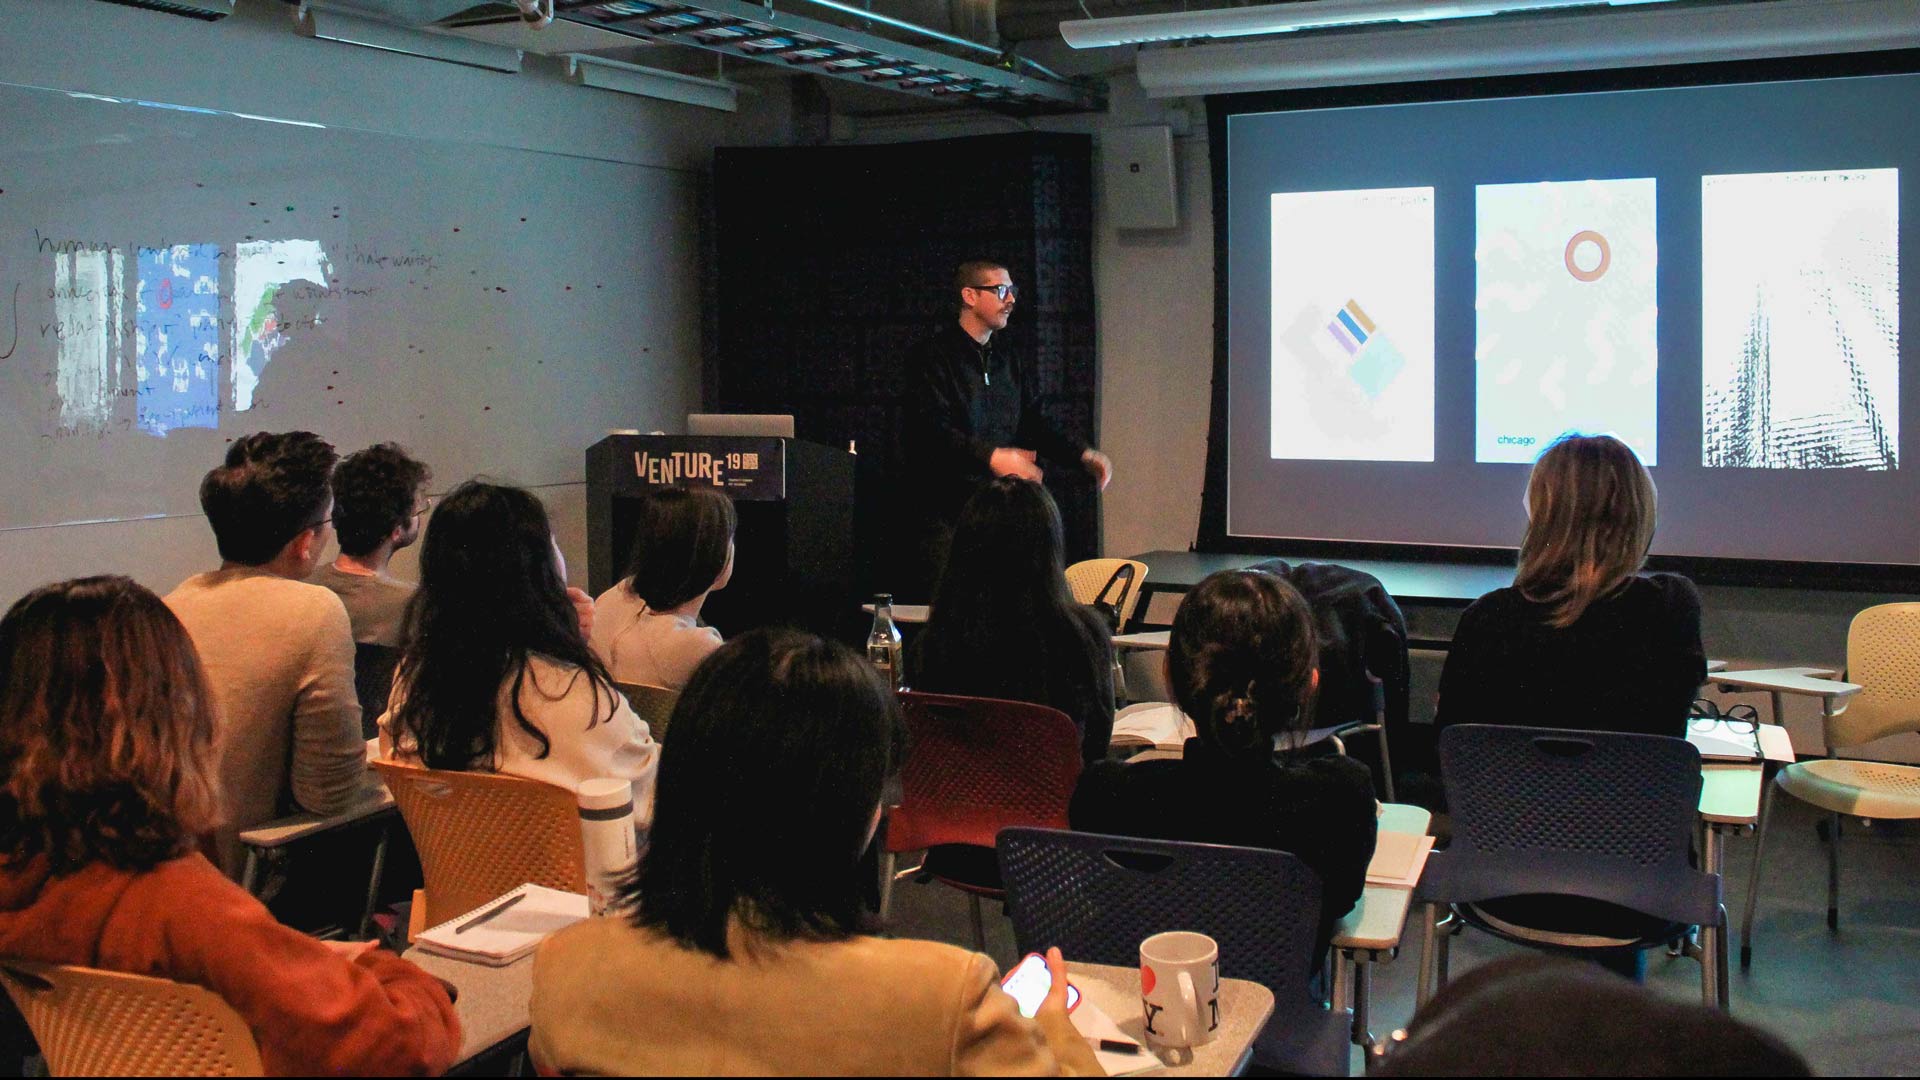 Jesse Reed at SVA MFA Design giving a lecture in a darkened classroom